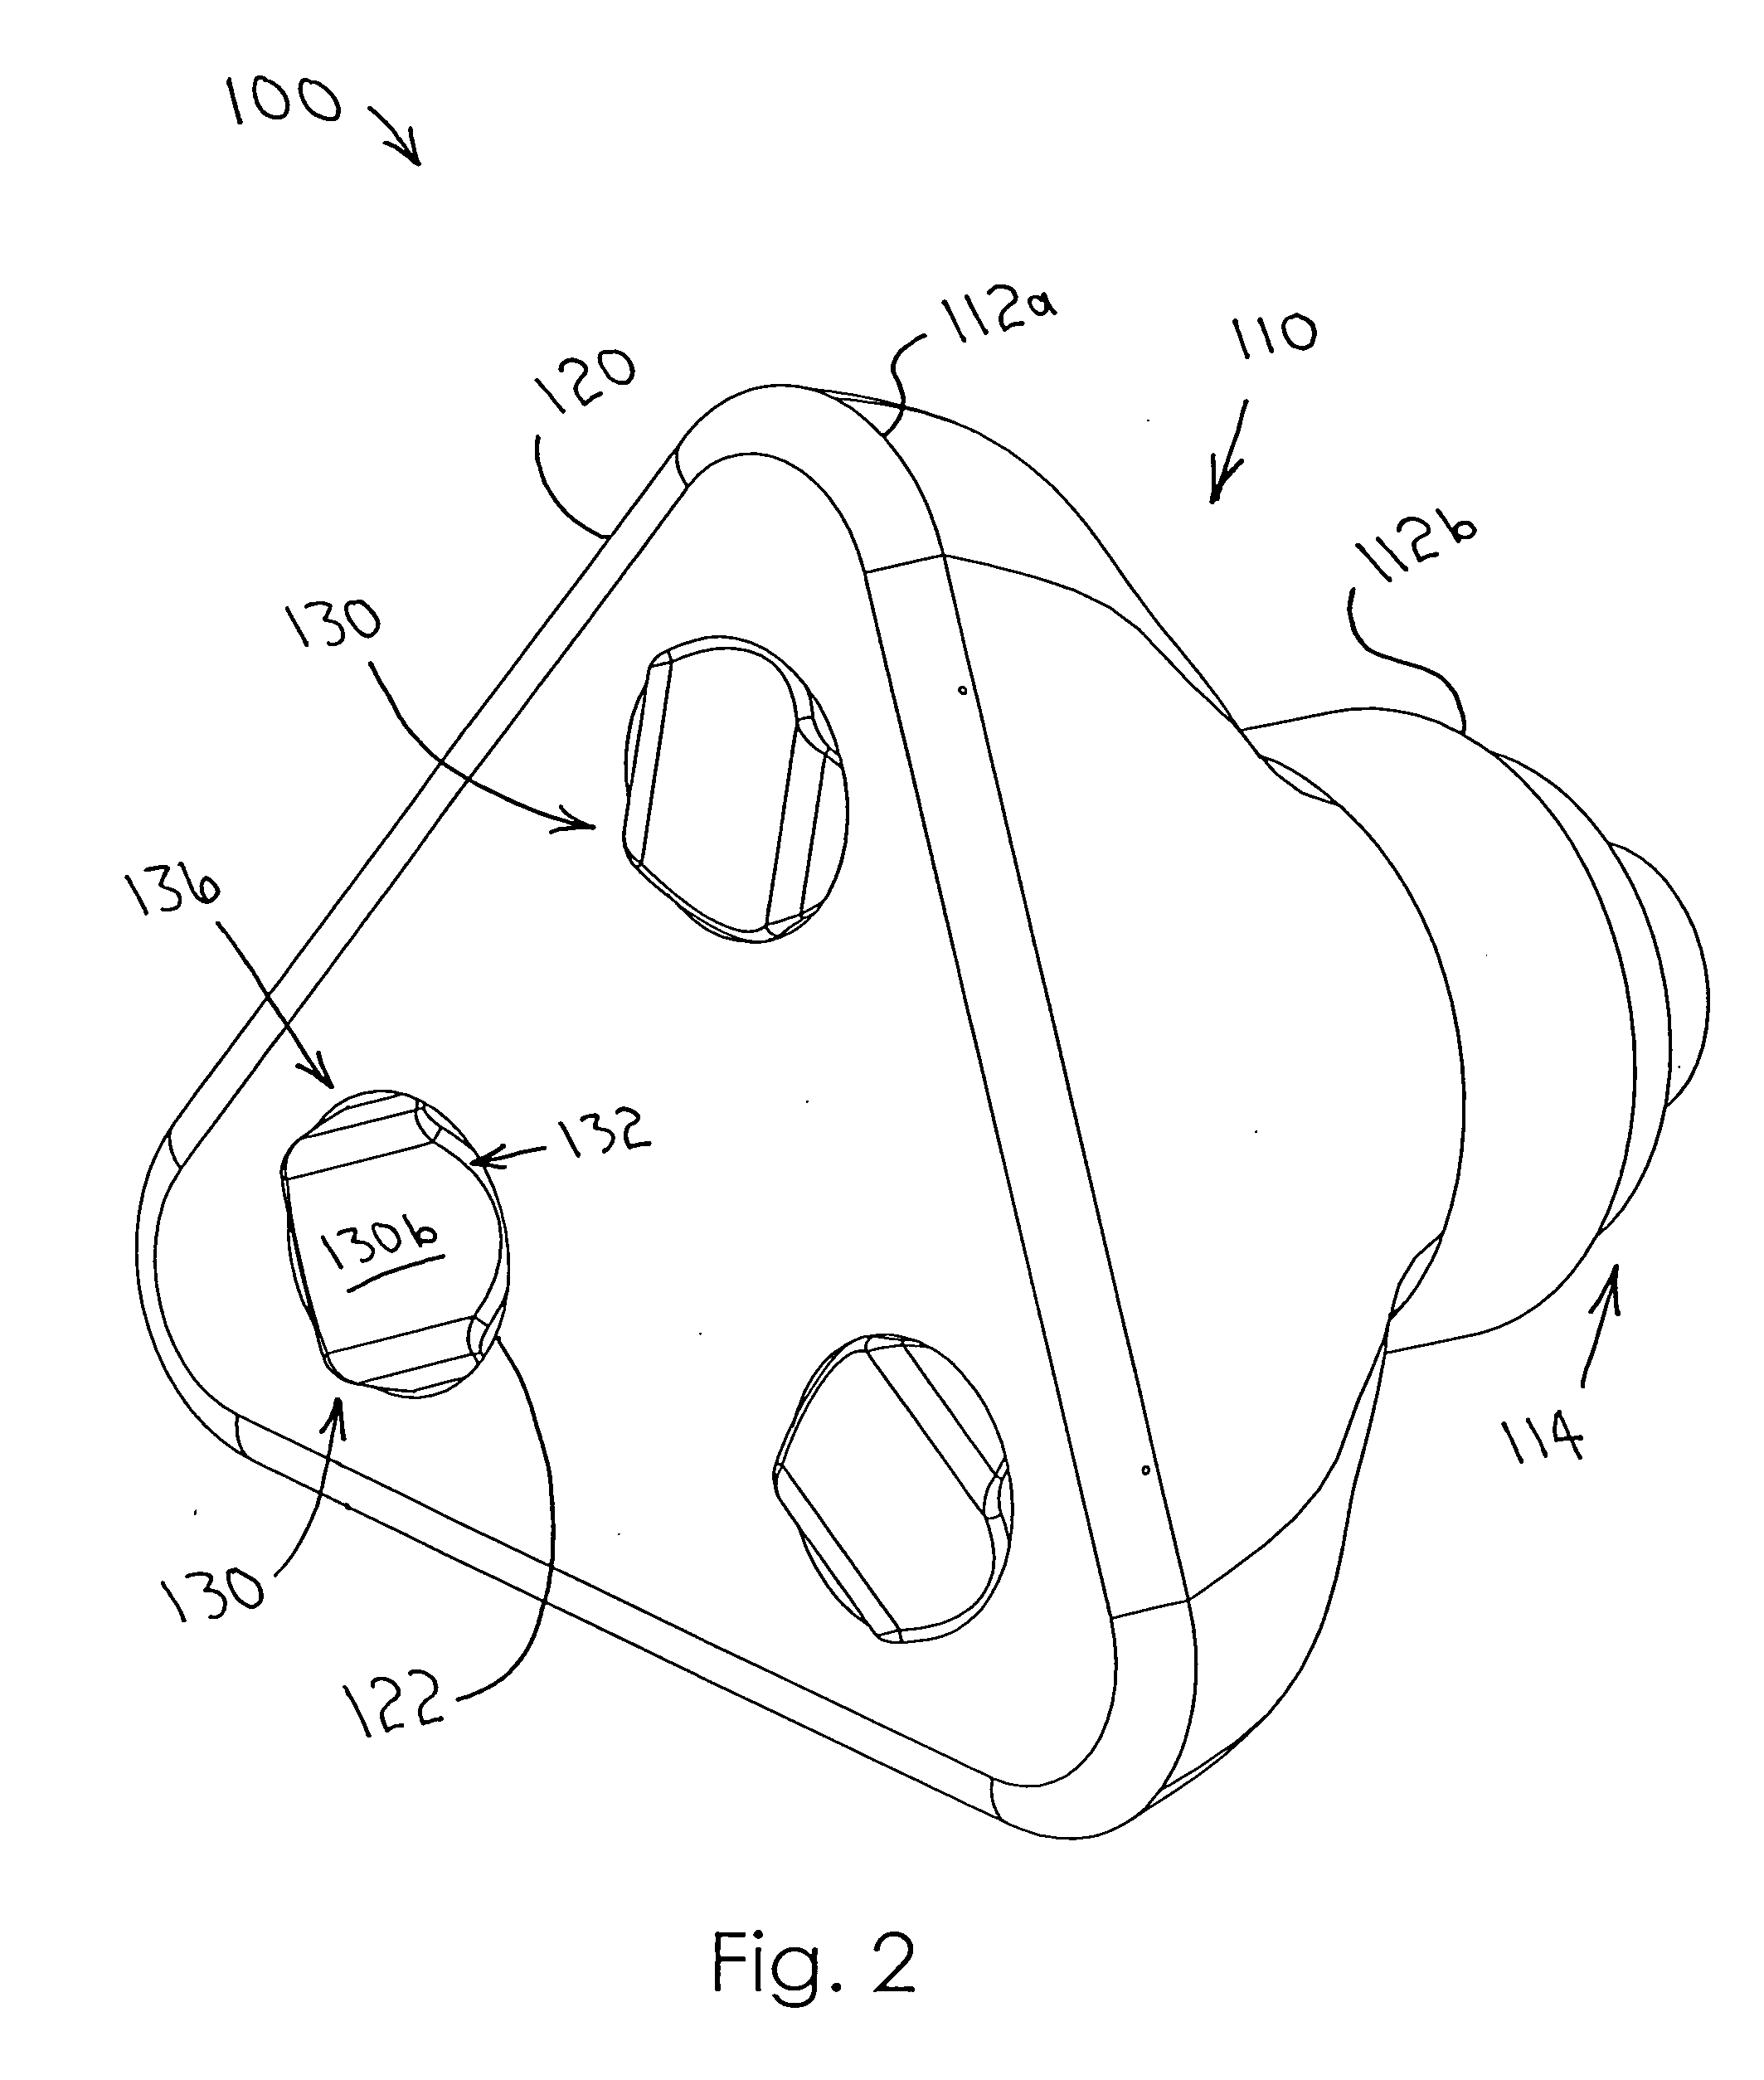 Vacuum attachment for converting a standard vacuum into a centralized dust collection system